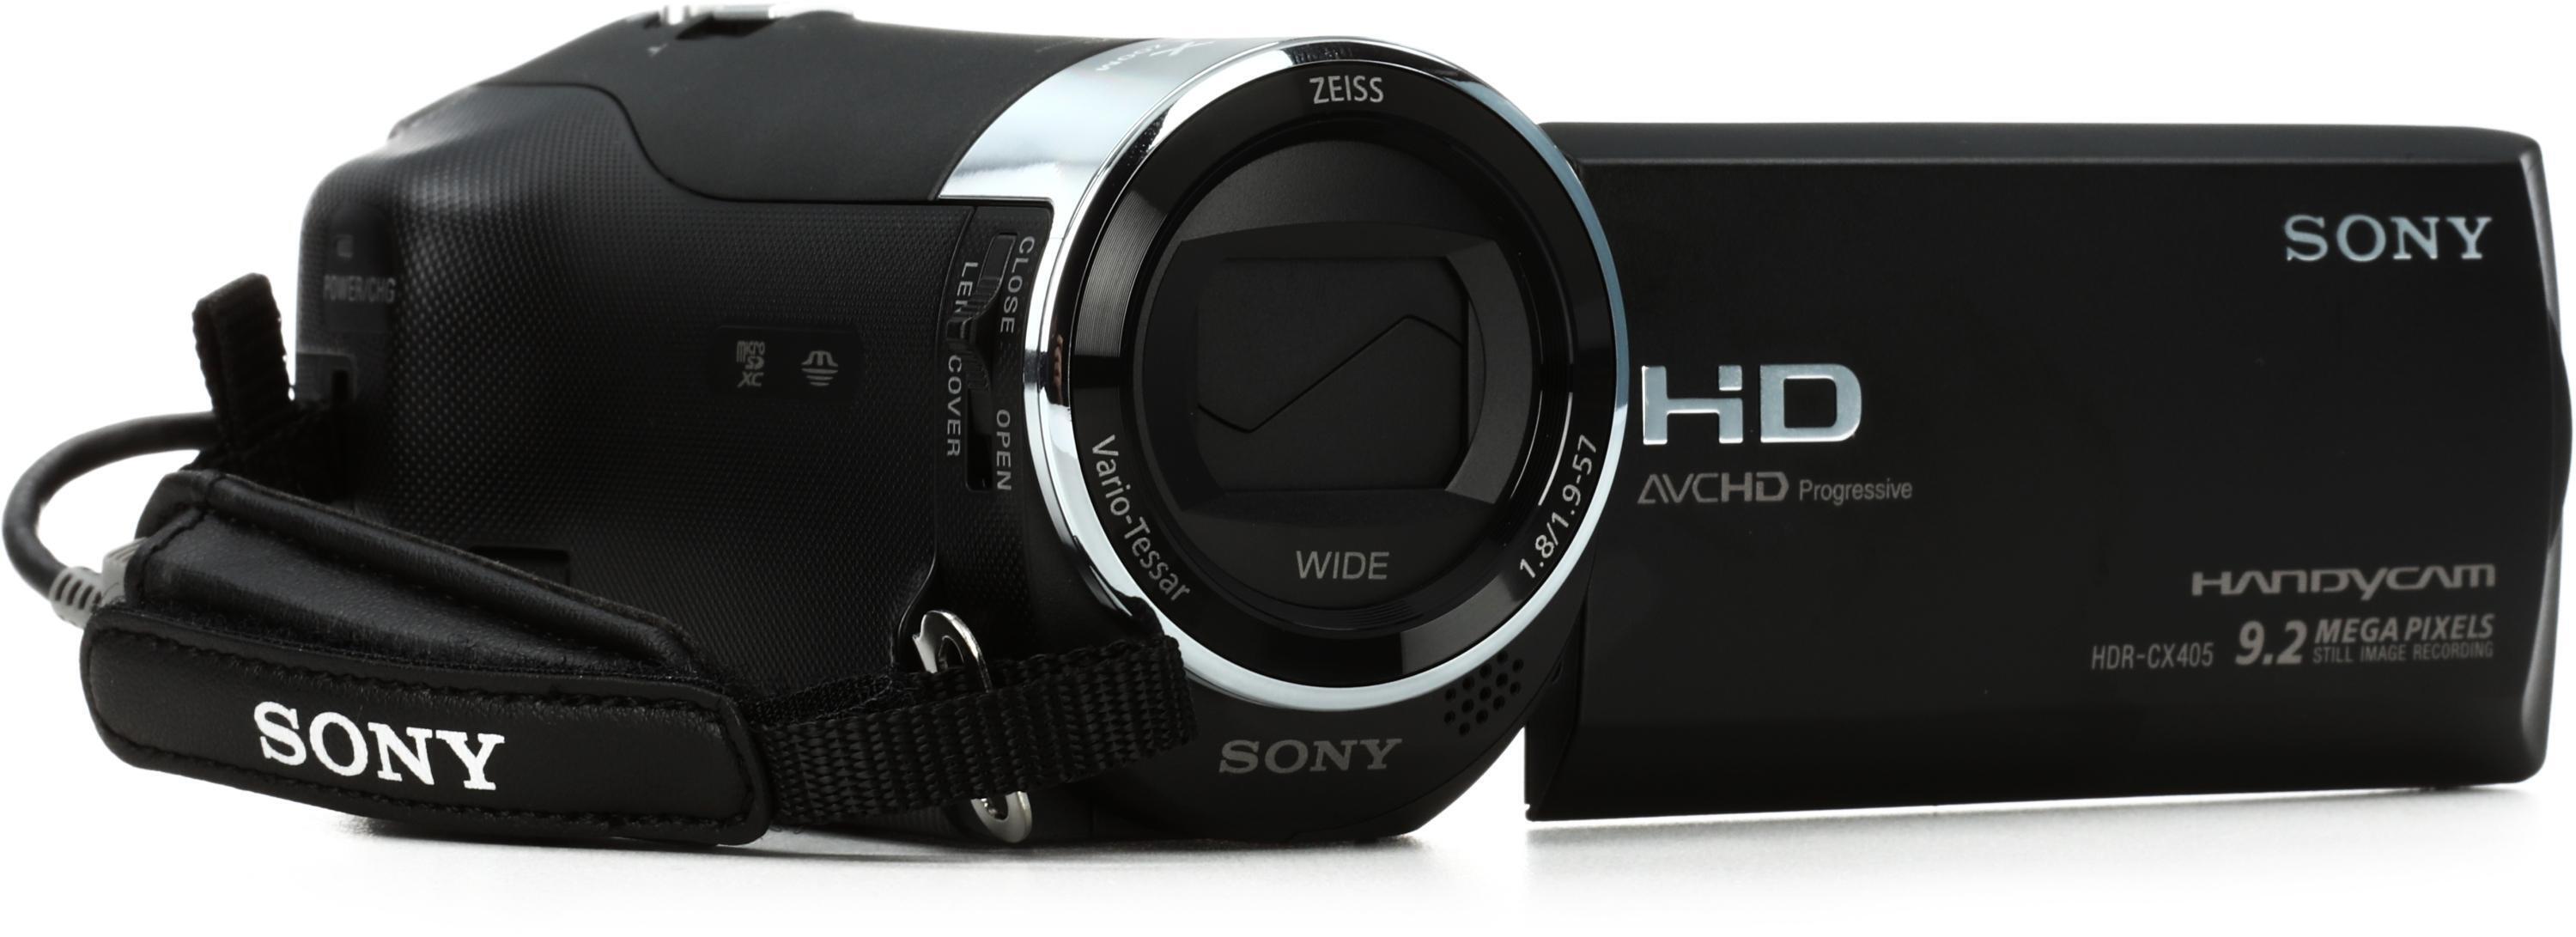 Sony HDR-CX405 Handycam with Exmor R CMOS Sensor | Sweetwater